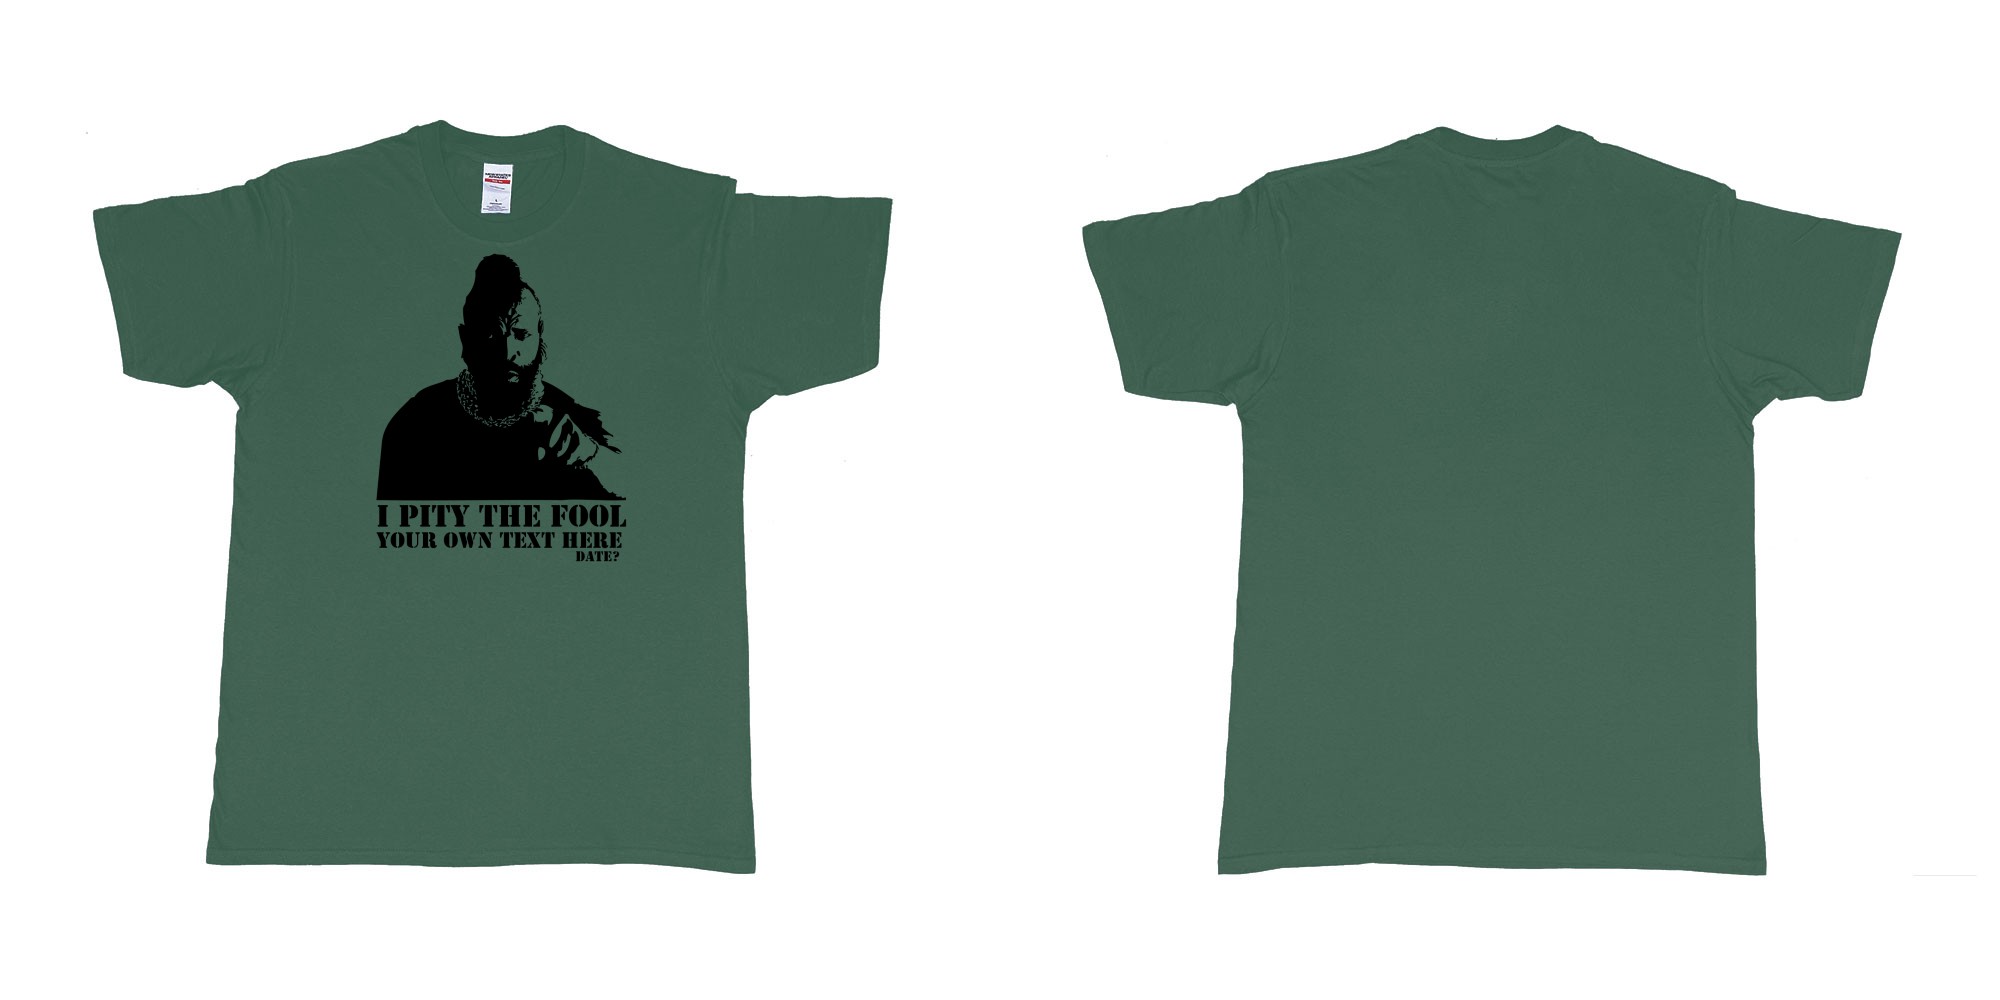 Custom tshirt design I pity the fool in fabric color forest-green choice your own text made in Bali by The Pirate Way